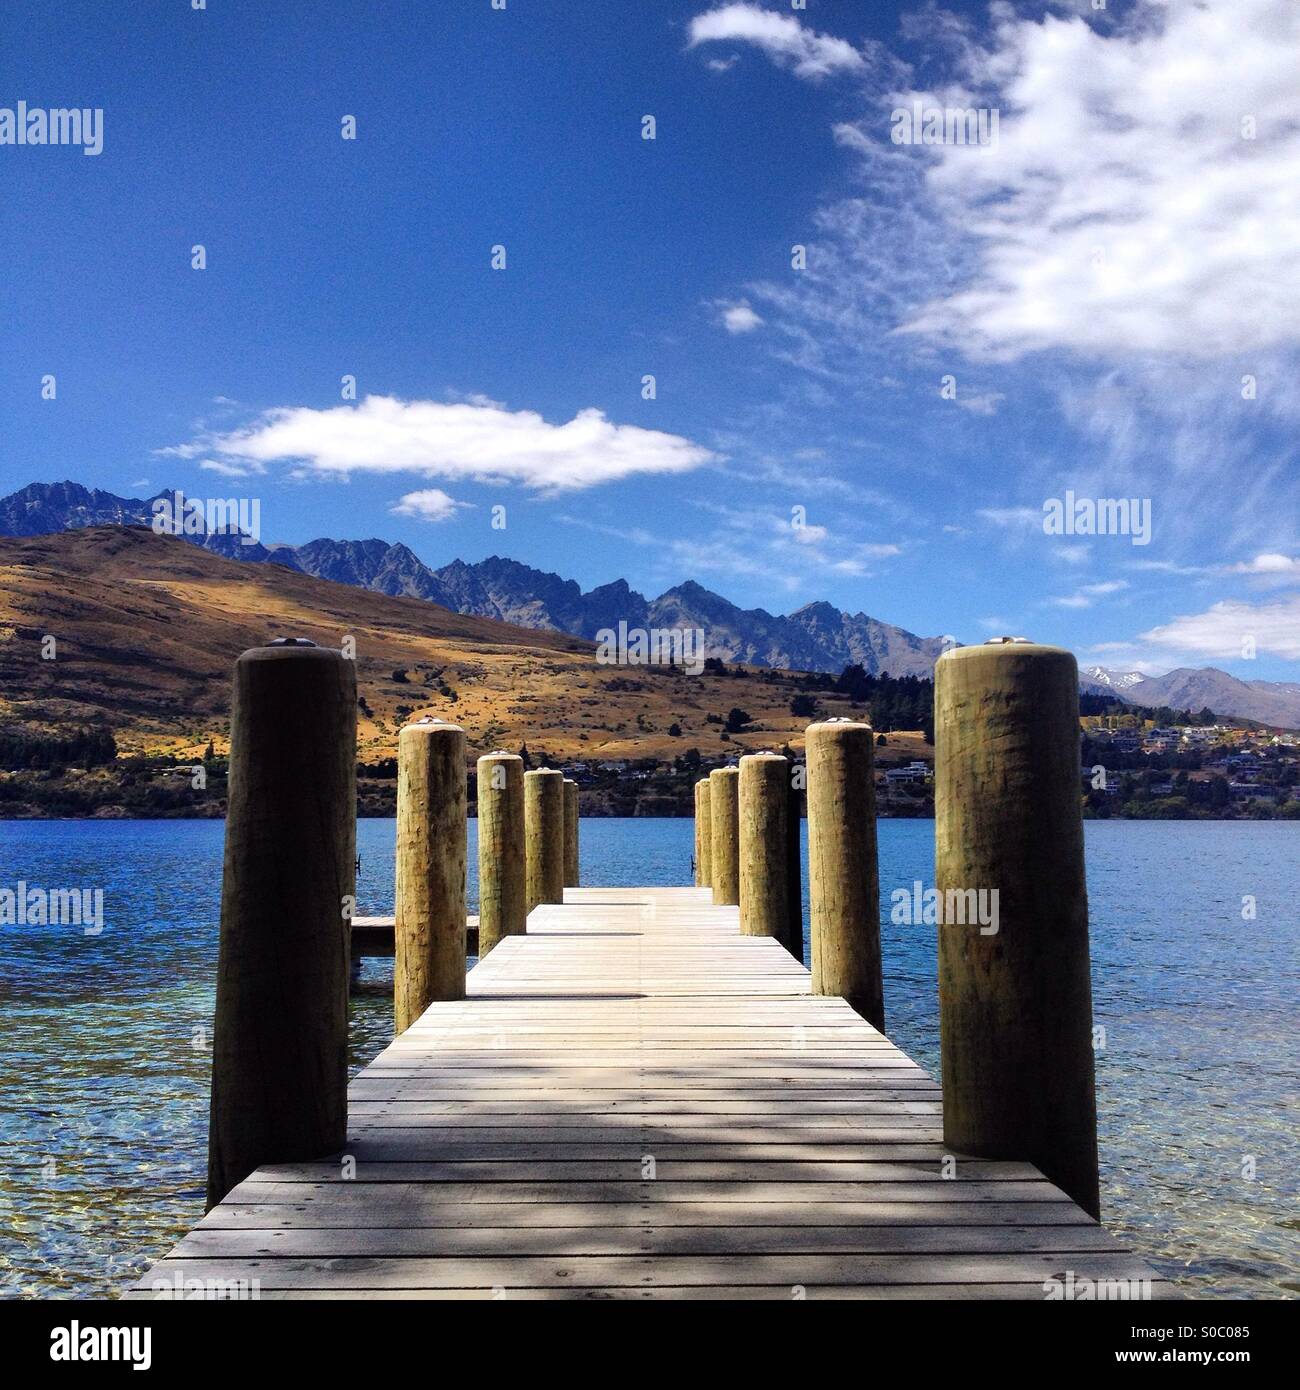 Wooden gangway over lake, New Zealand Stock Photo